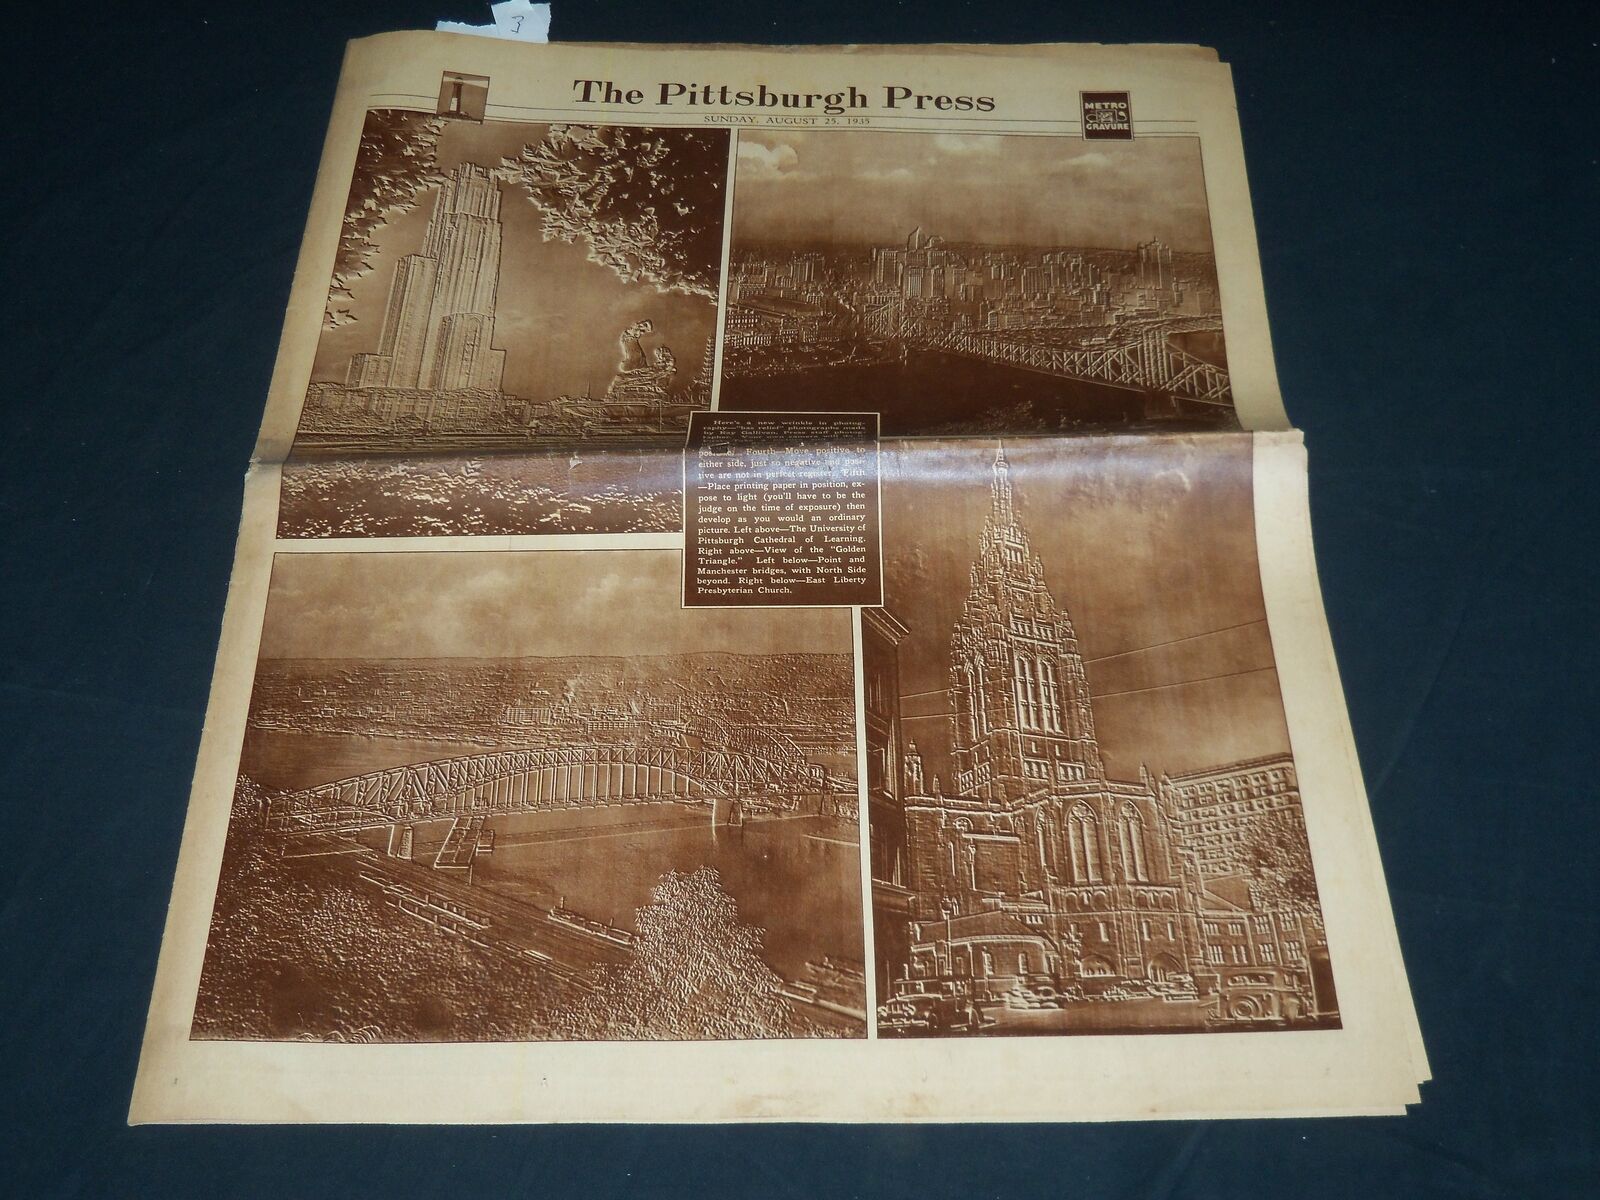 1935 AUGUST 25 THE PITTSBURGH PRESS SUNDAY METRO GRAVURE - CITY SITES - NP 4537